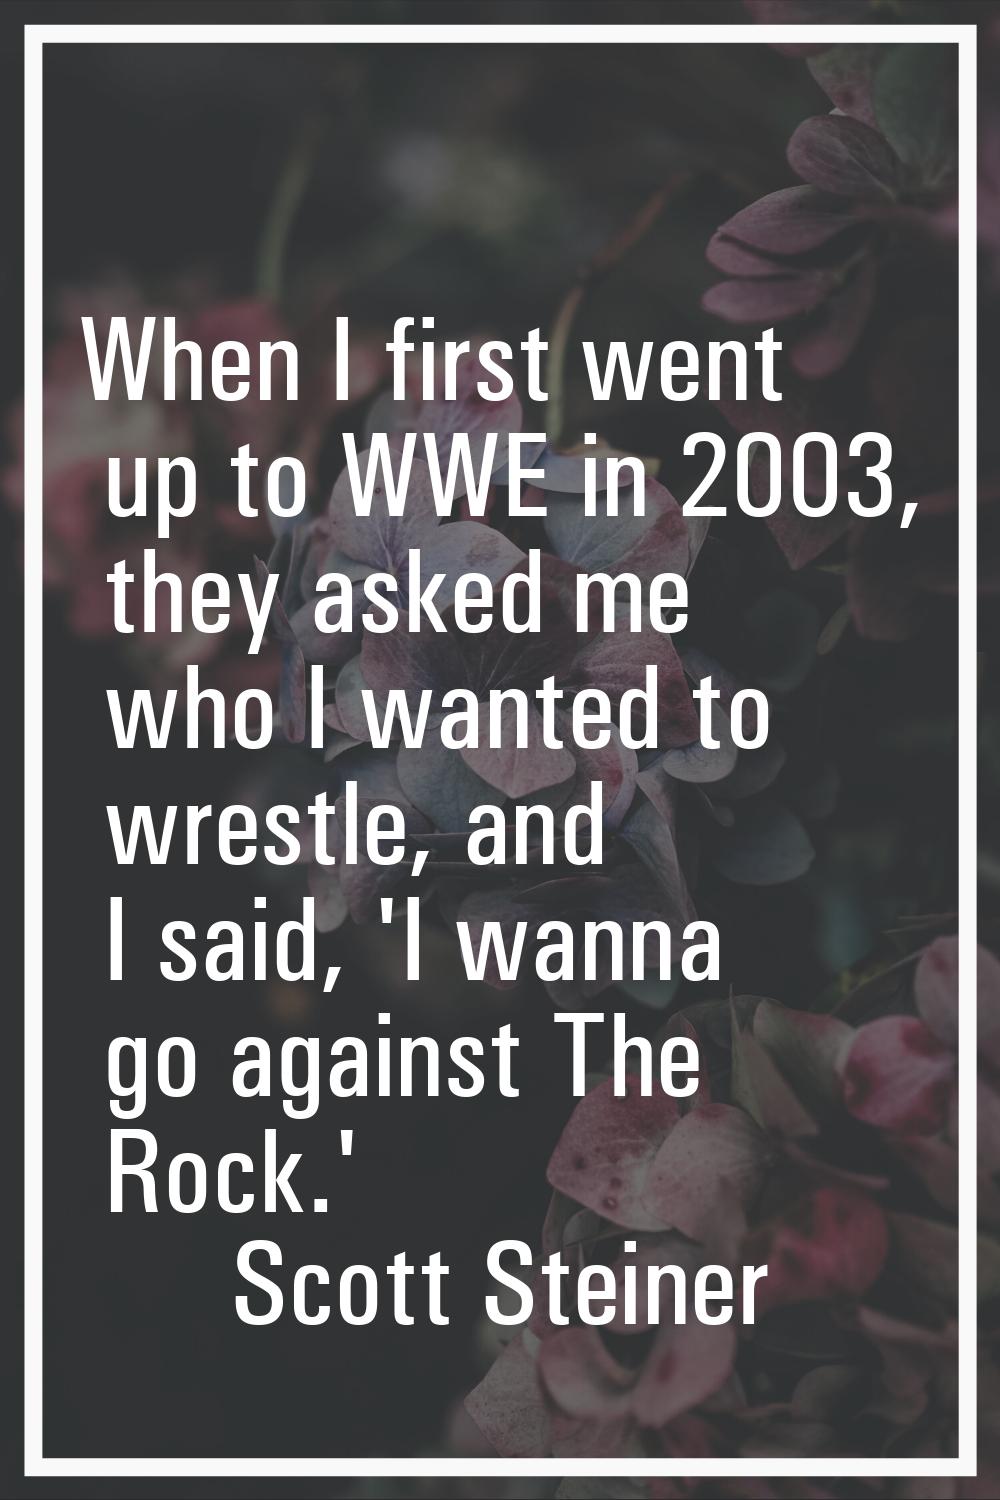 When I first went up to WWE in 2003, they asked me who I wanted to wrestle, and I said, 'I wanna go